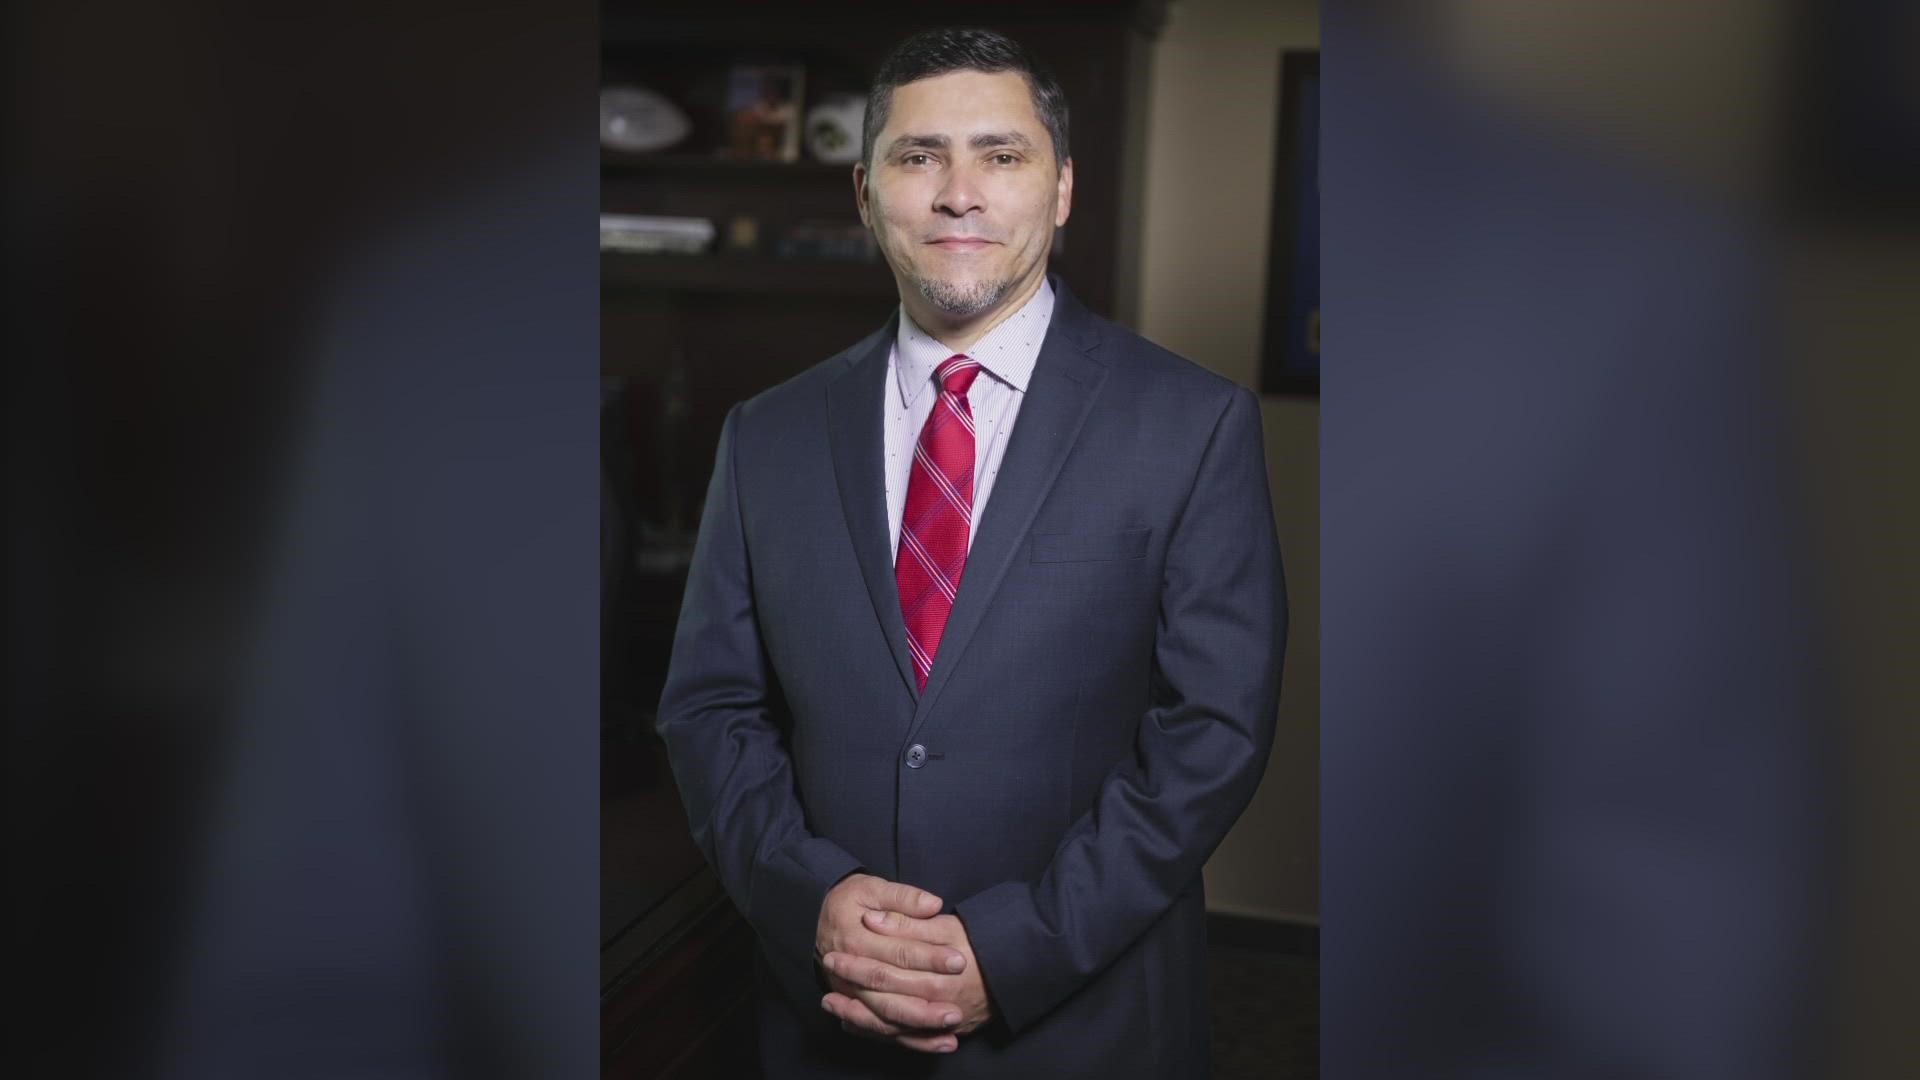 Angel Rivera was named the lone finalist for Mesquite ISD's superintendent position, filling one of several major openings in North Texas.